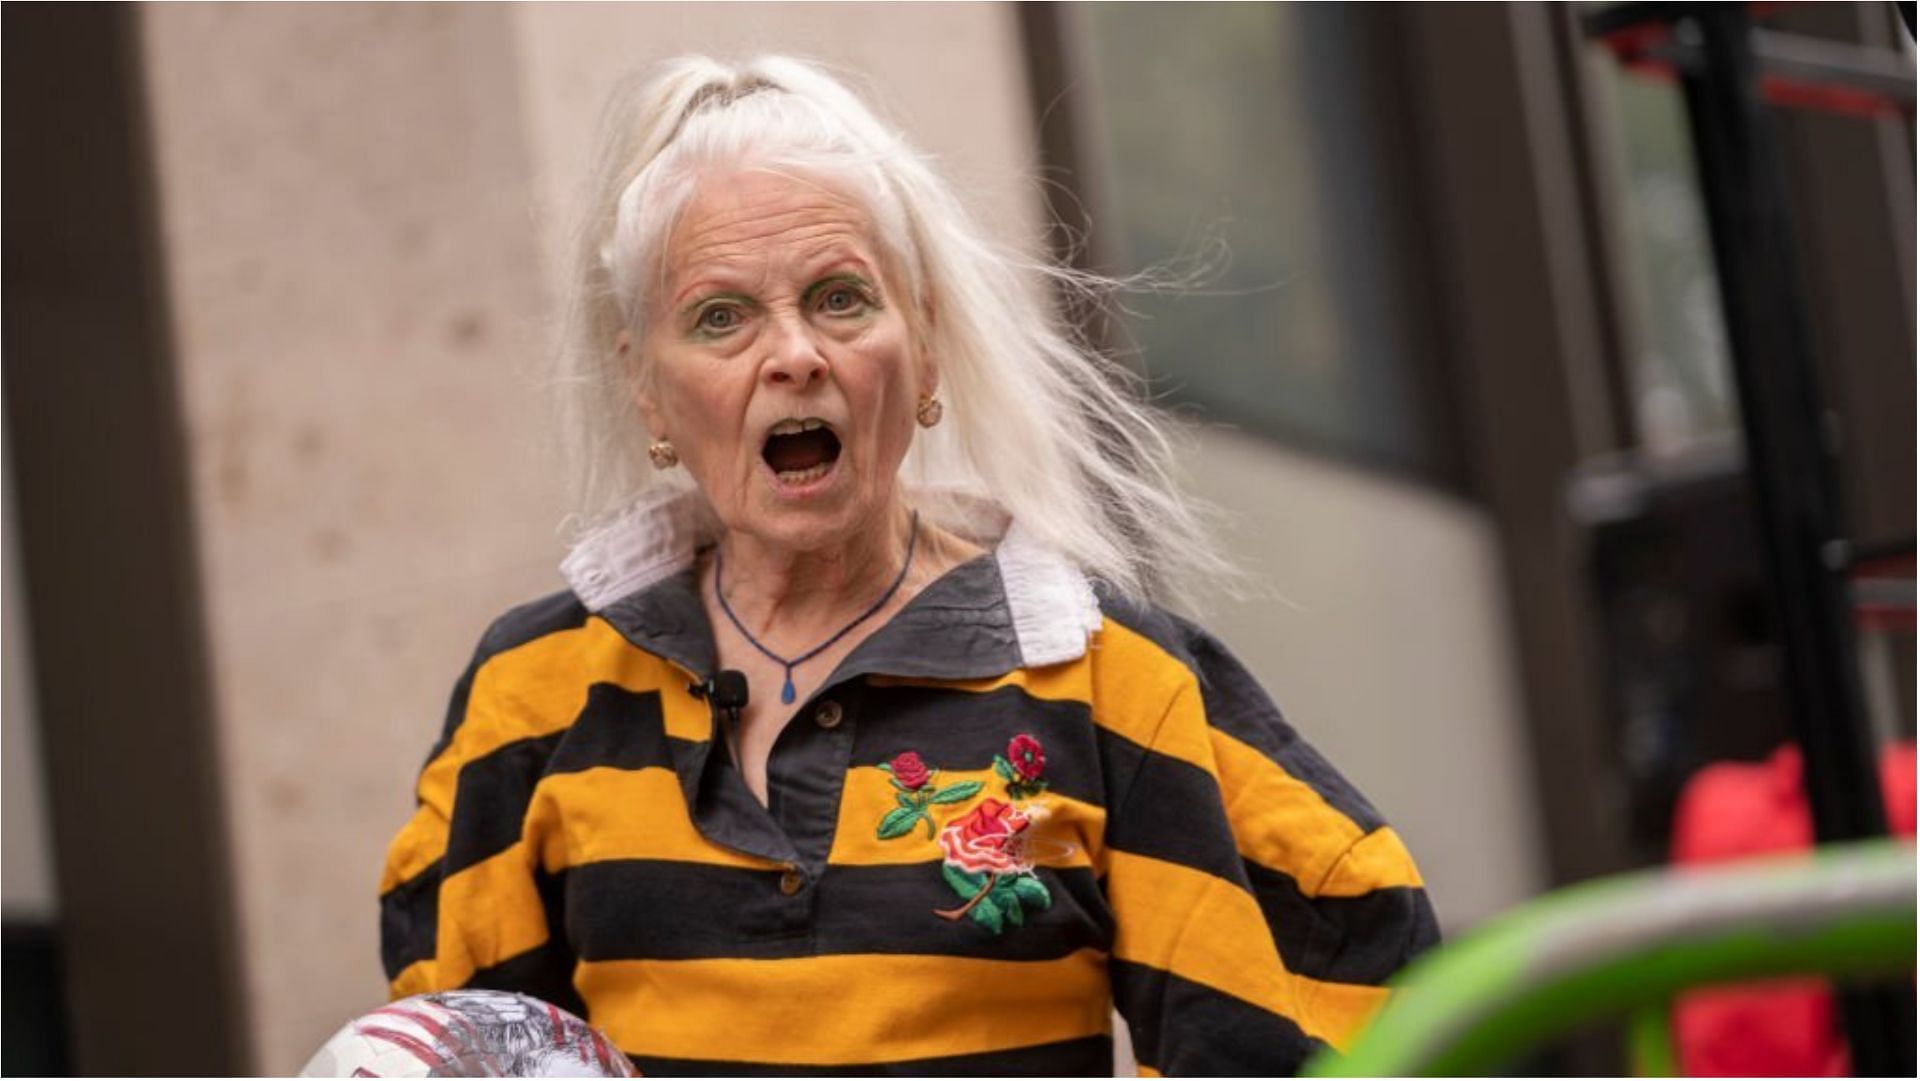 Vivienne Westwood has earned a lot from her career in the fashion industry (Image via Ki Price/Getty Images)